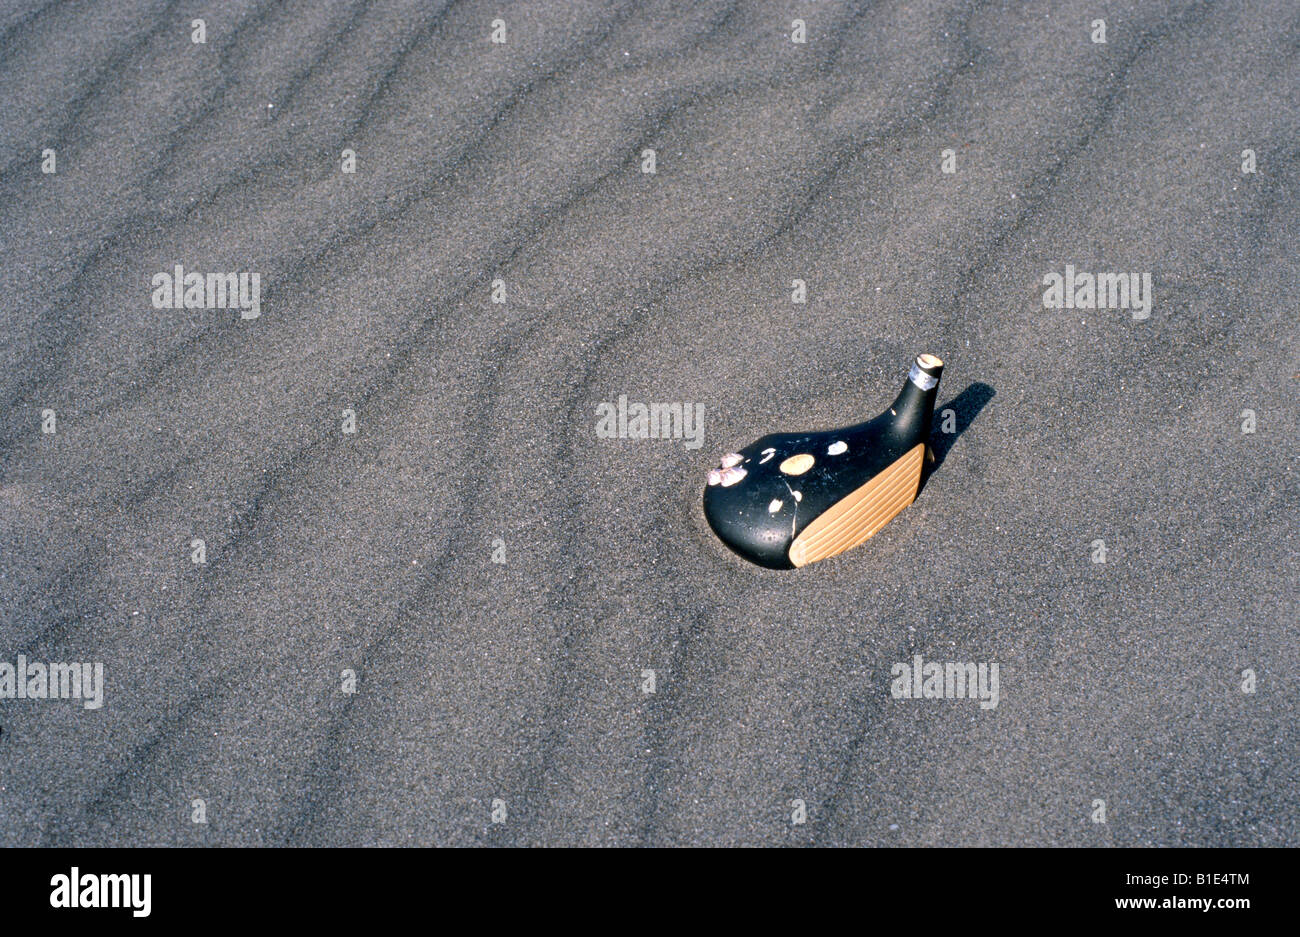 Old golf club head with barnacles sitting in windblown sand. Stock Photo